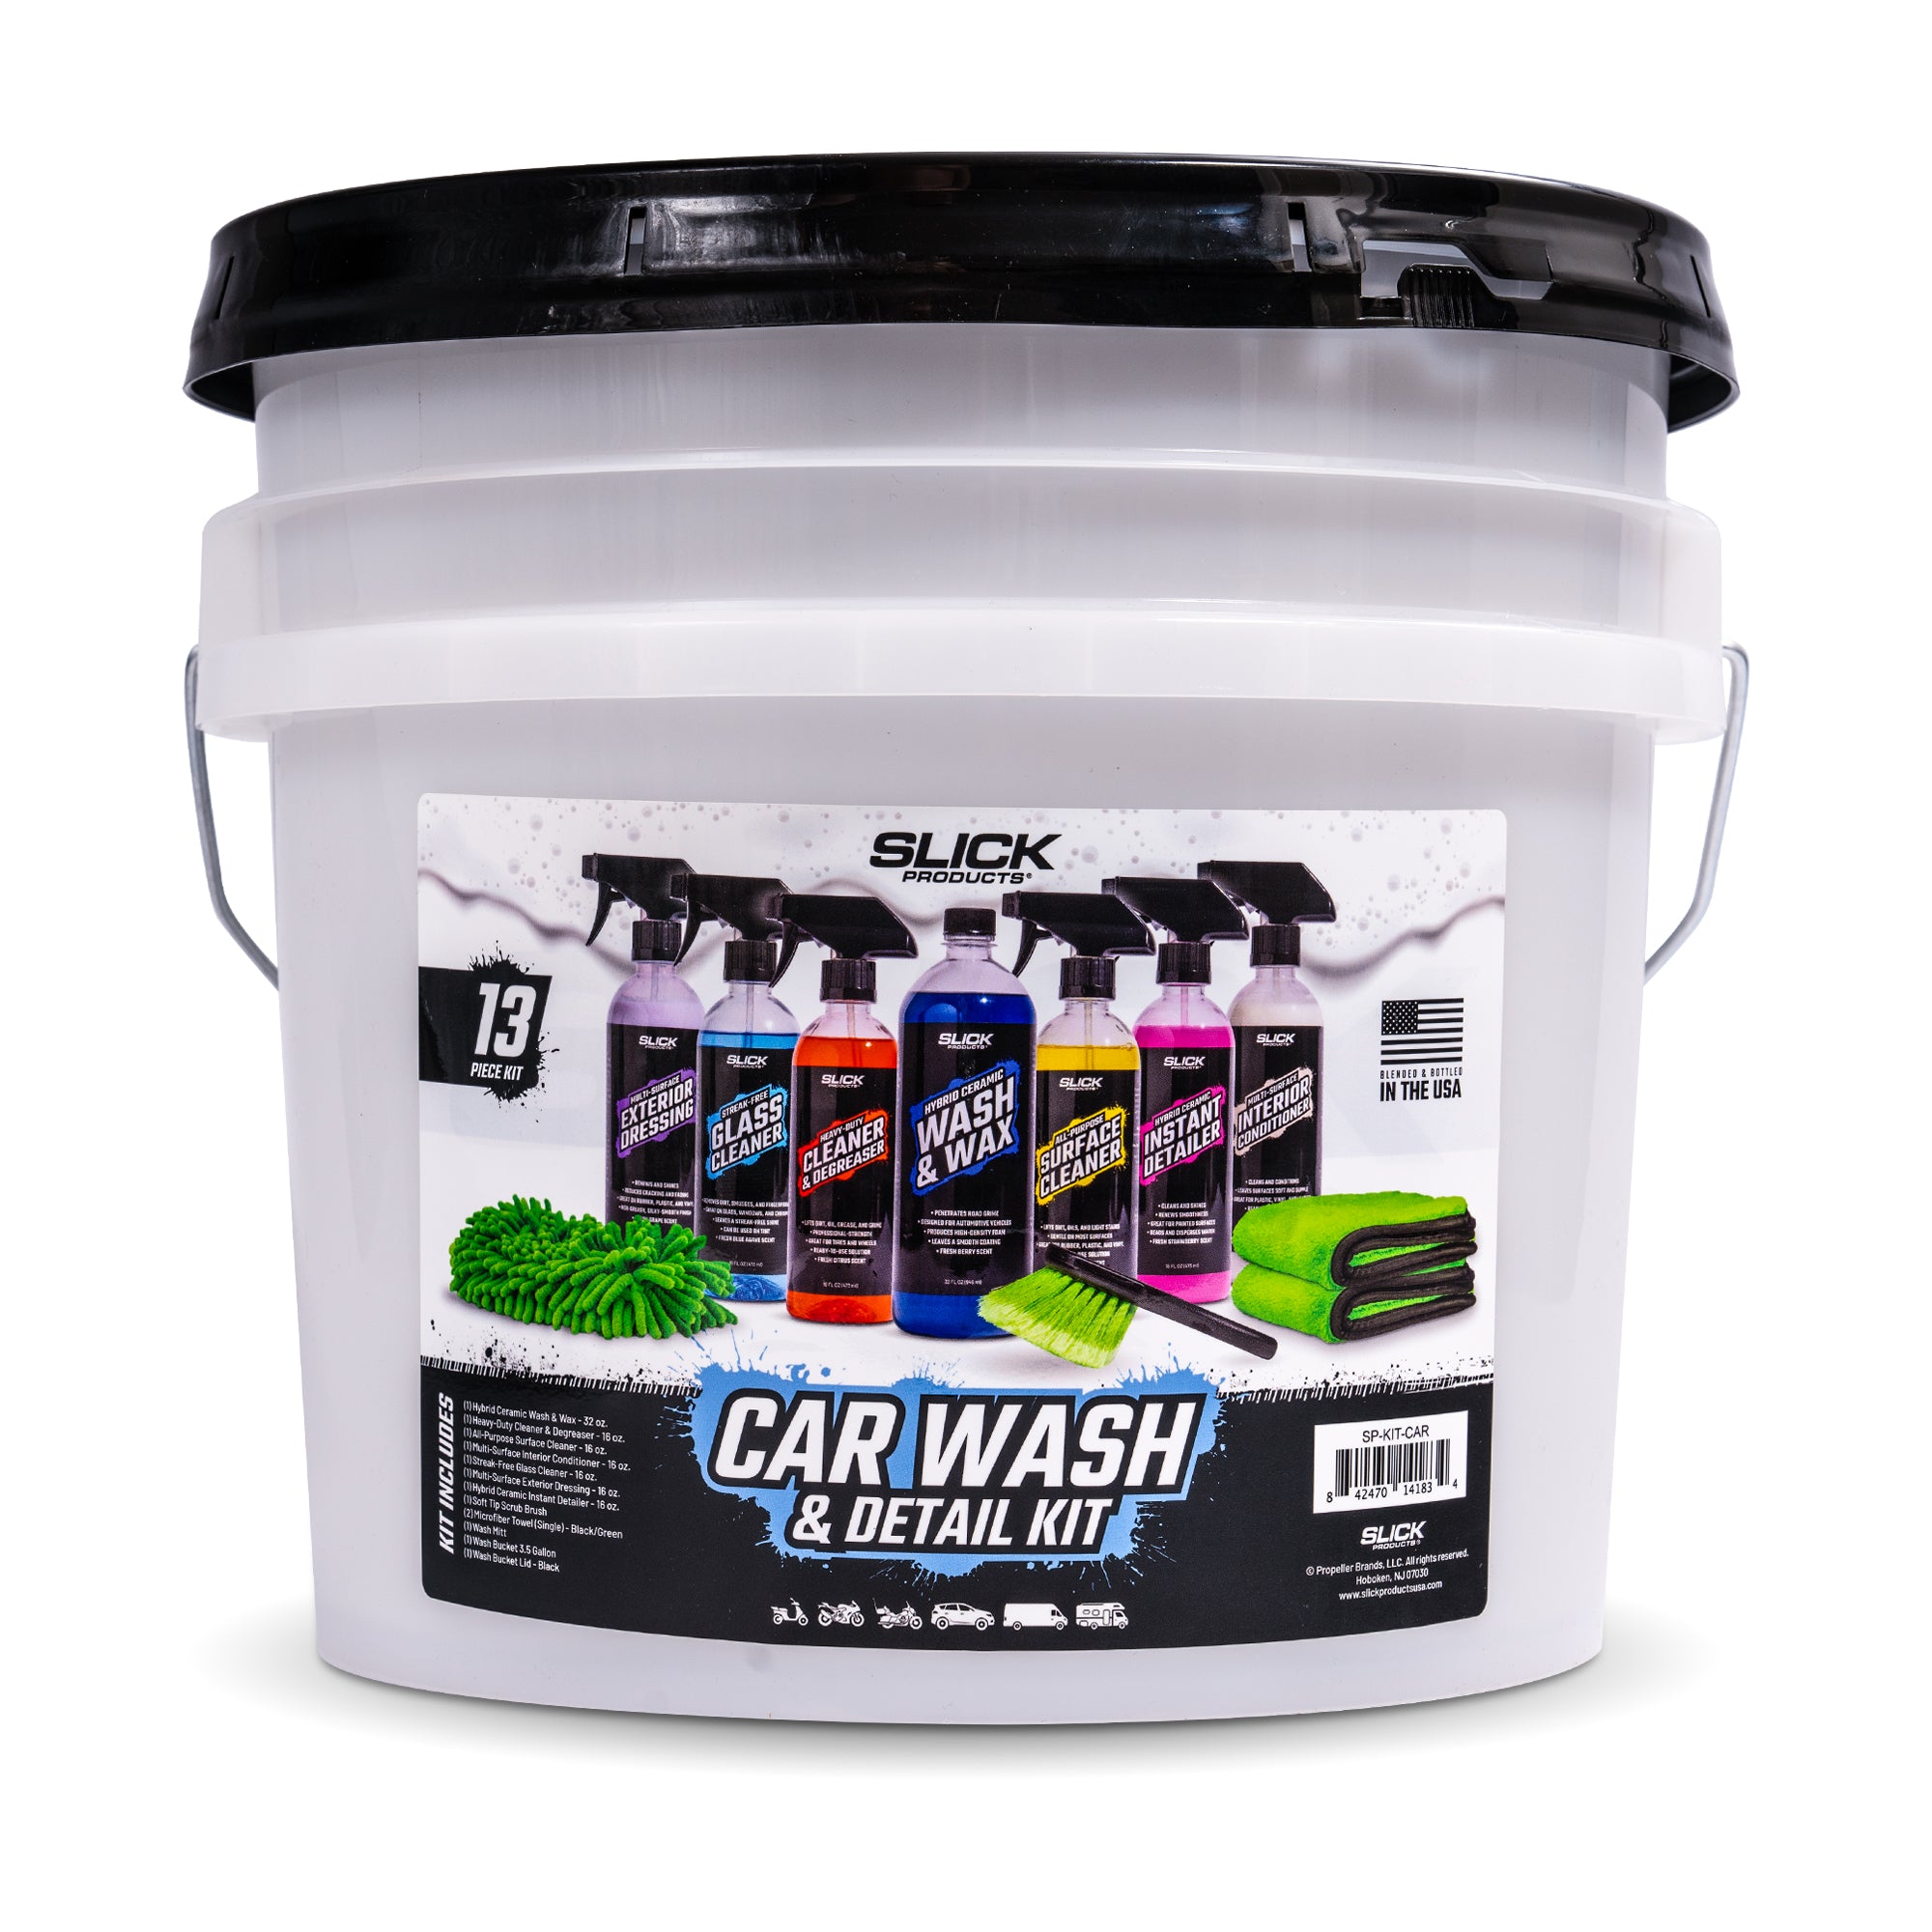 GCP Products 18Pcs Car Cleaning Kit Interior Detailing Wash